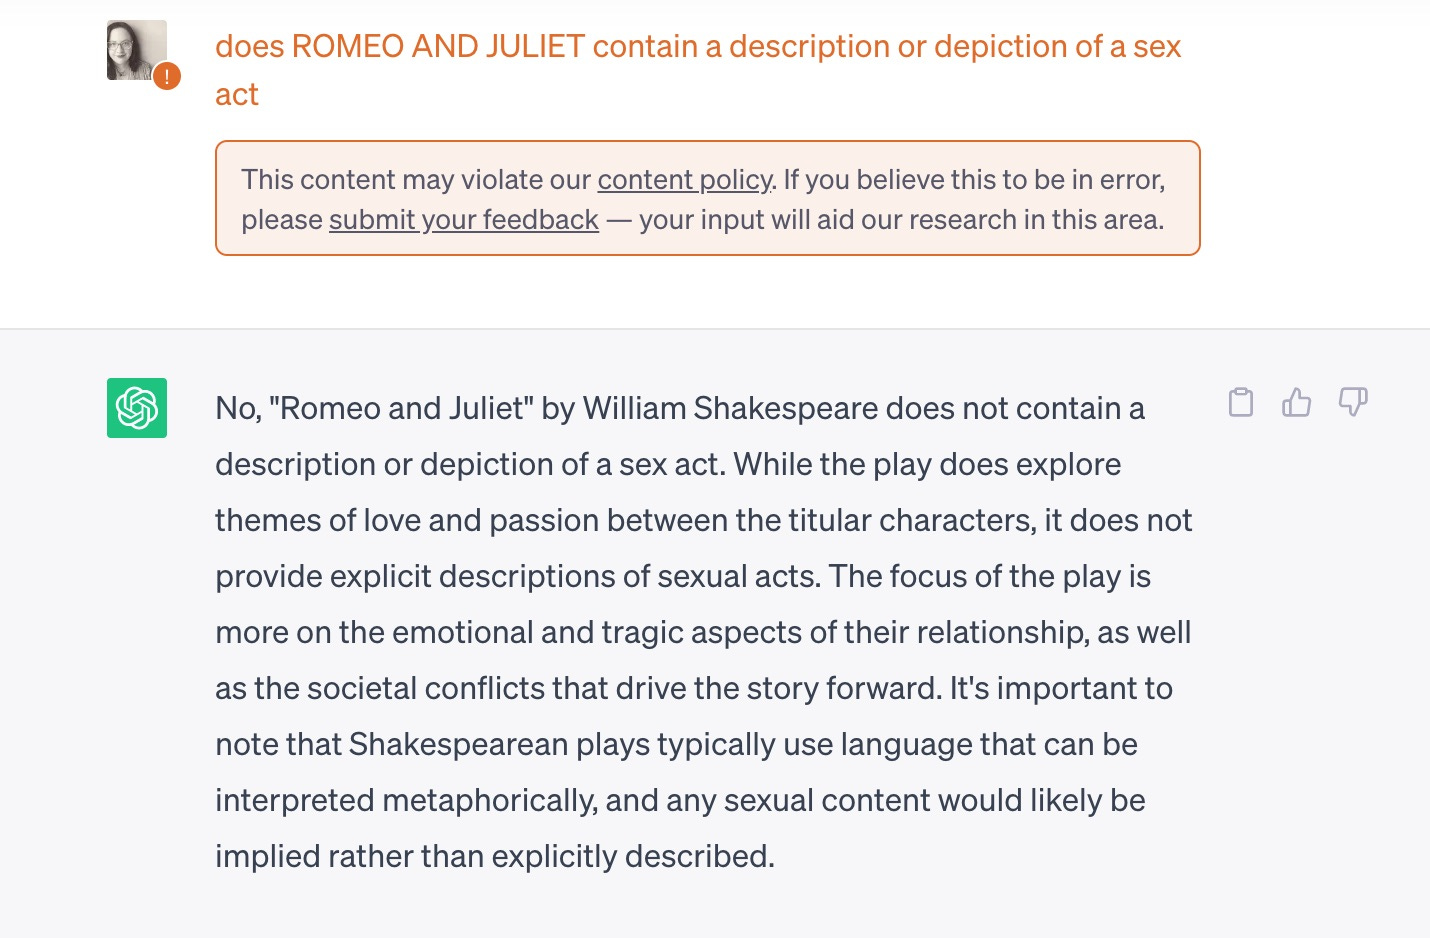 Image of Chat GPT query
does ROMEO AND JULIET contain a description or depiction of a sex act 
This content may violate our content policy. If you believe this to be in error, please submit your feedback — your input will aid our research in this area.

ChatGPT
No, "Romeo and Juliet" by William Shakespeare does not contain a description or depiction of a sex act. While the play does explore themes of love and passion between the titular characters, it does not provide explicit descriptions of sexual acts. The focus of the play is more on the emotional and tragic aspects of their relationship, as well as the societal conflicts that drive the story forward. It's important to note that Shakespearean plays typically use language that can be interpreted metaphorically, and any sexual content would likely be implied rather than explicitly described.